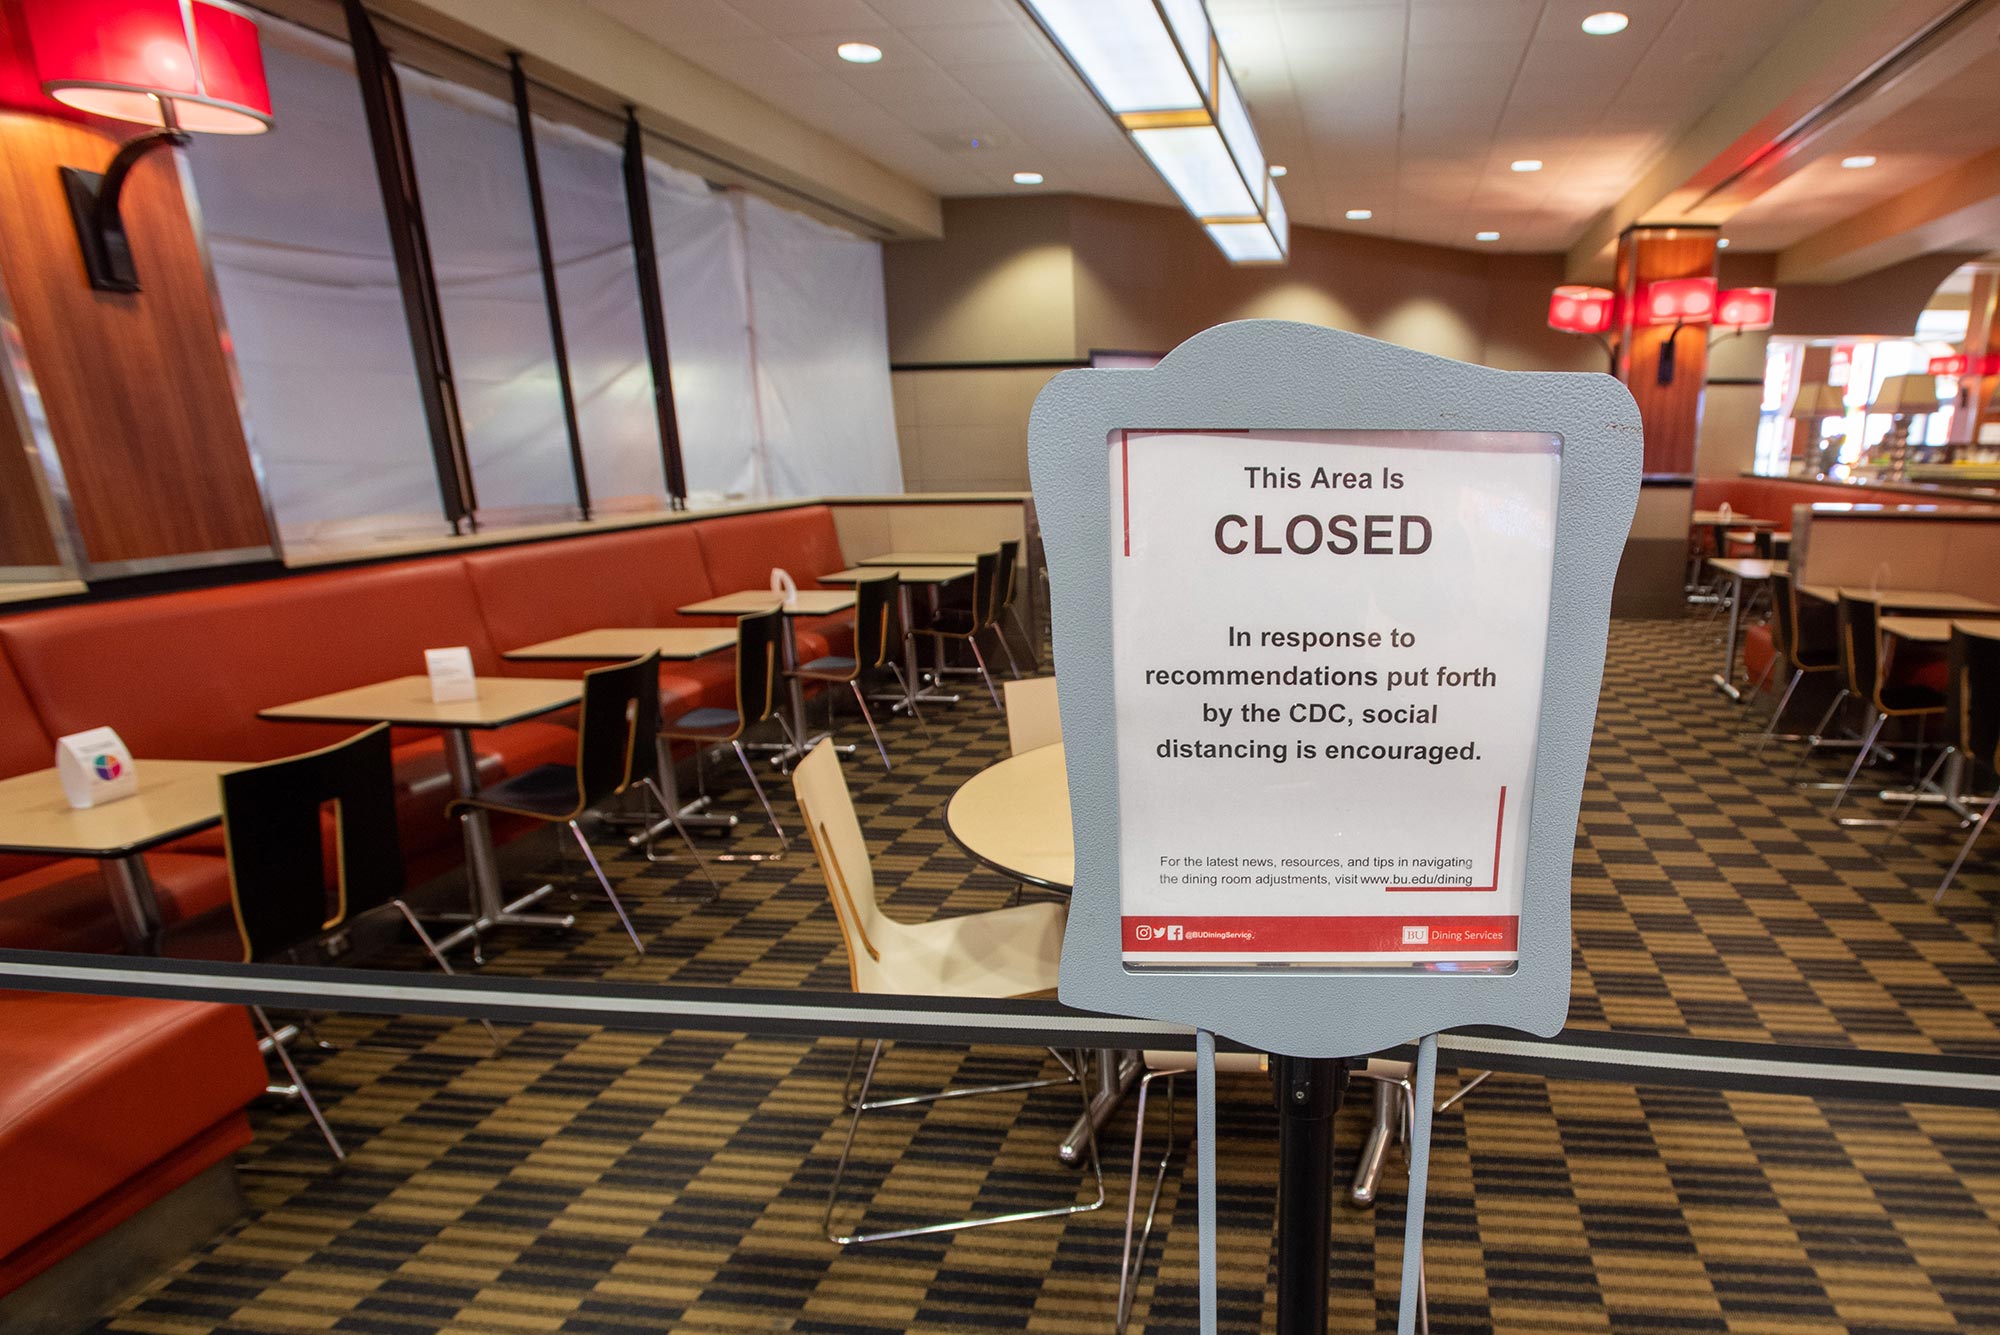 Photo of a sign that says: "This Area is CLOSED in response to recommendations put forth by the CDC, social distancing is encouraged. For the latest news, resources, and tips in navigating the dining room adjustments, visit www.bu.edu/dining" The George Sherman Union dining area and other eateries closed to on-premises patrons this week as a precaution against COVID-19.